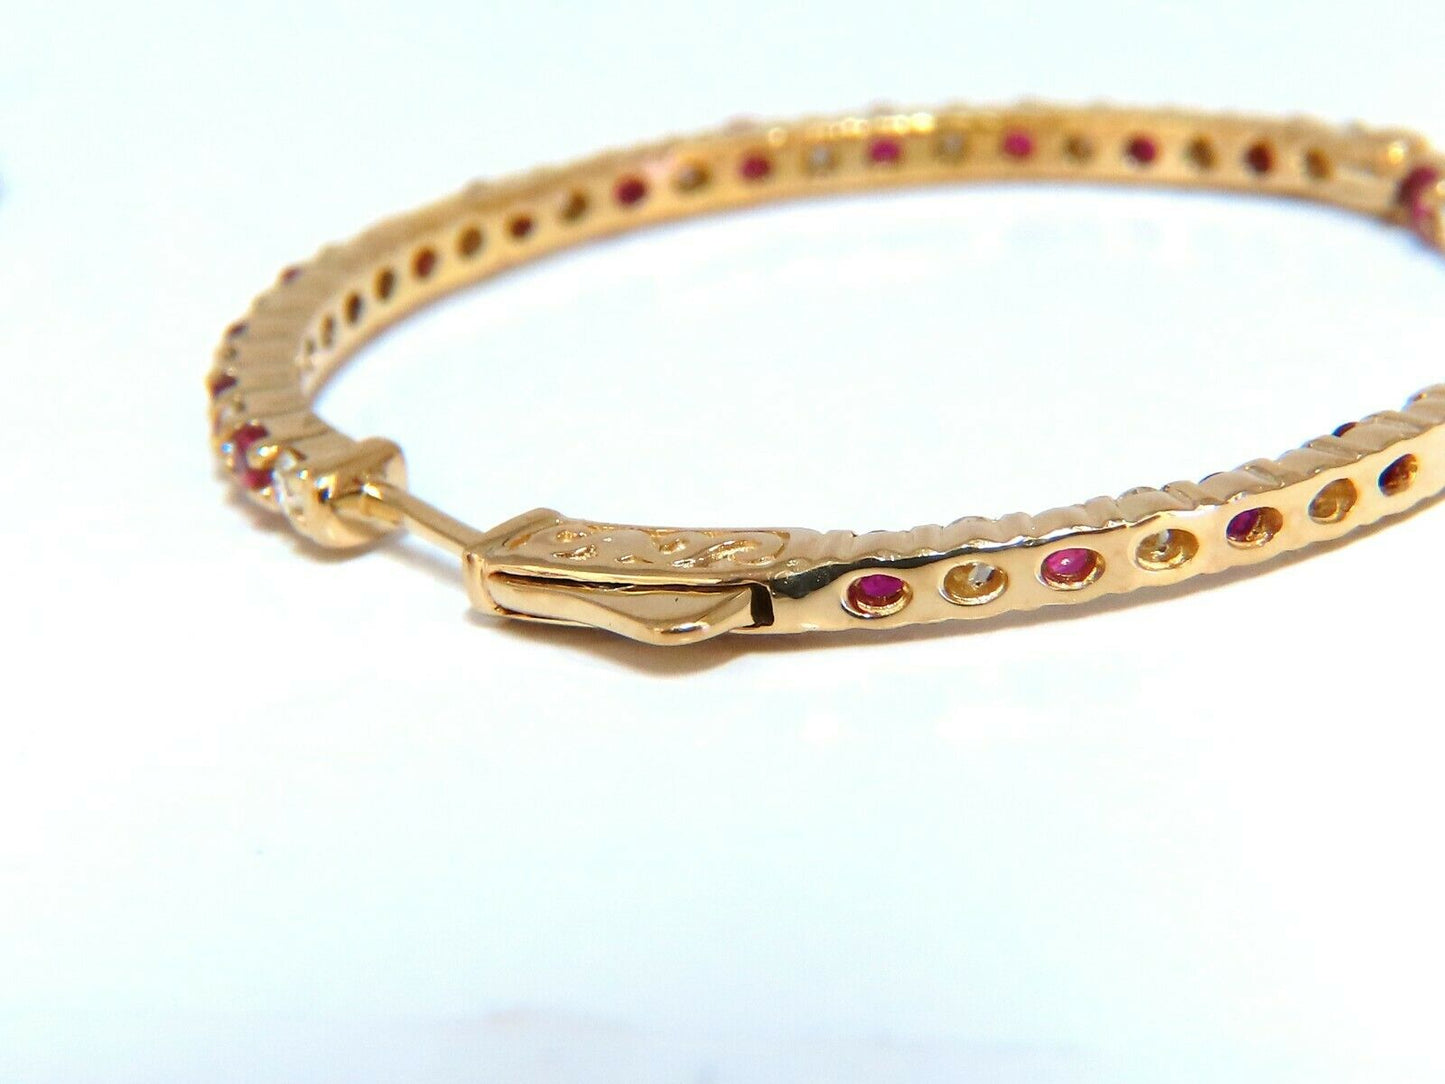 4.80ct natural Ruby diamonds hoop earrings 14kt yellow gold inside out